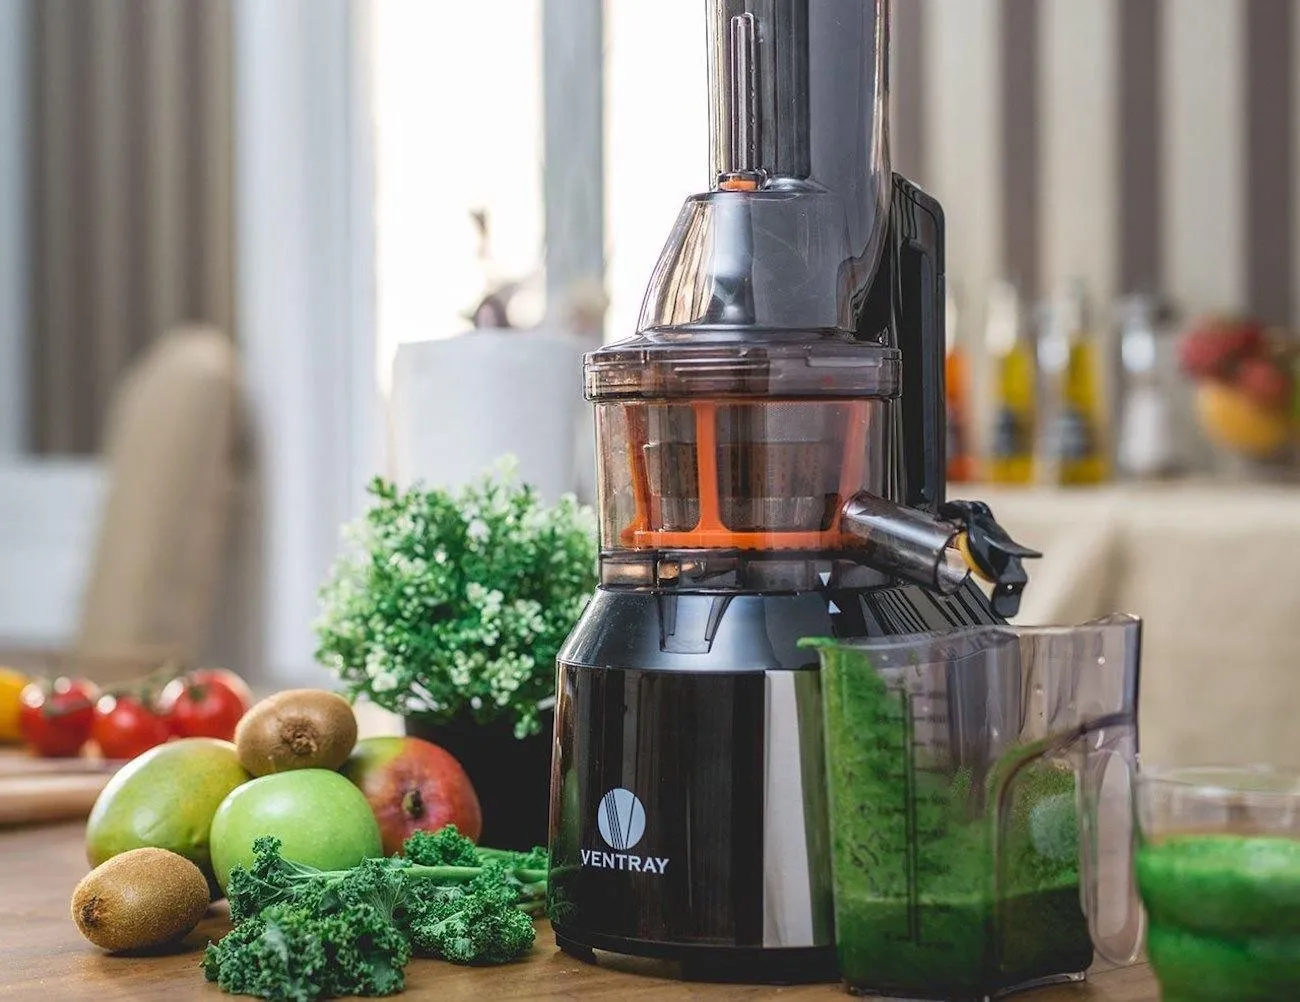 What Is A Masticating Juicer?